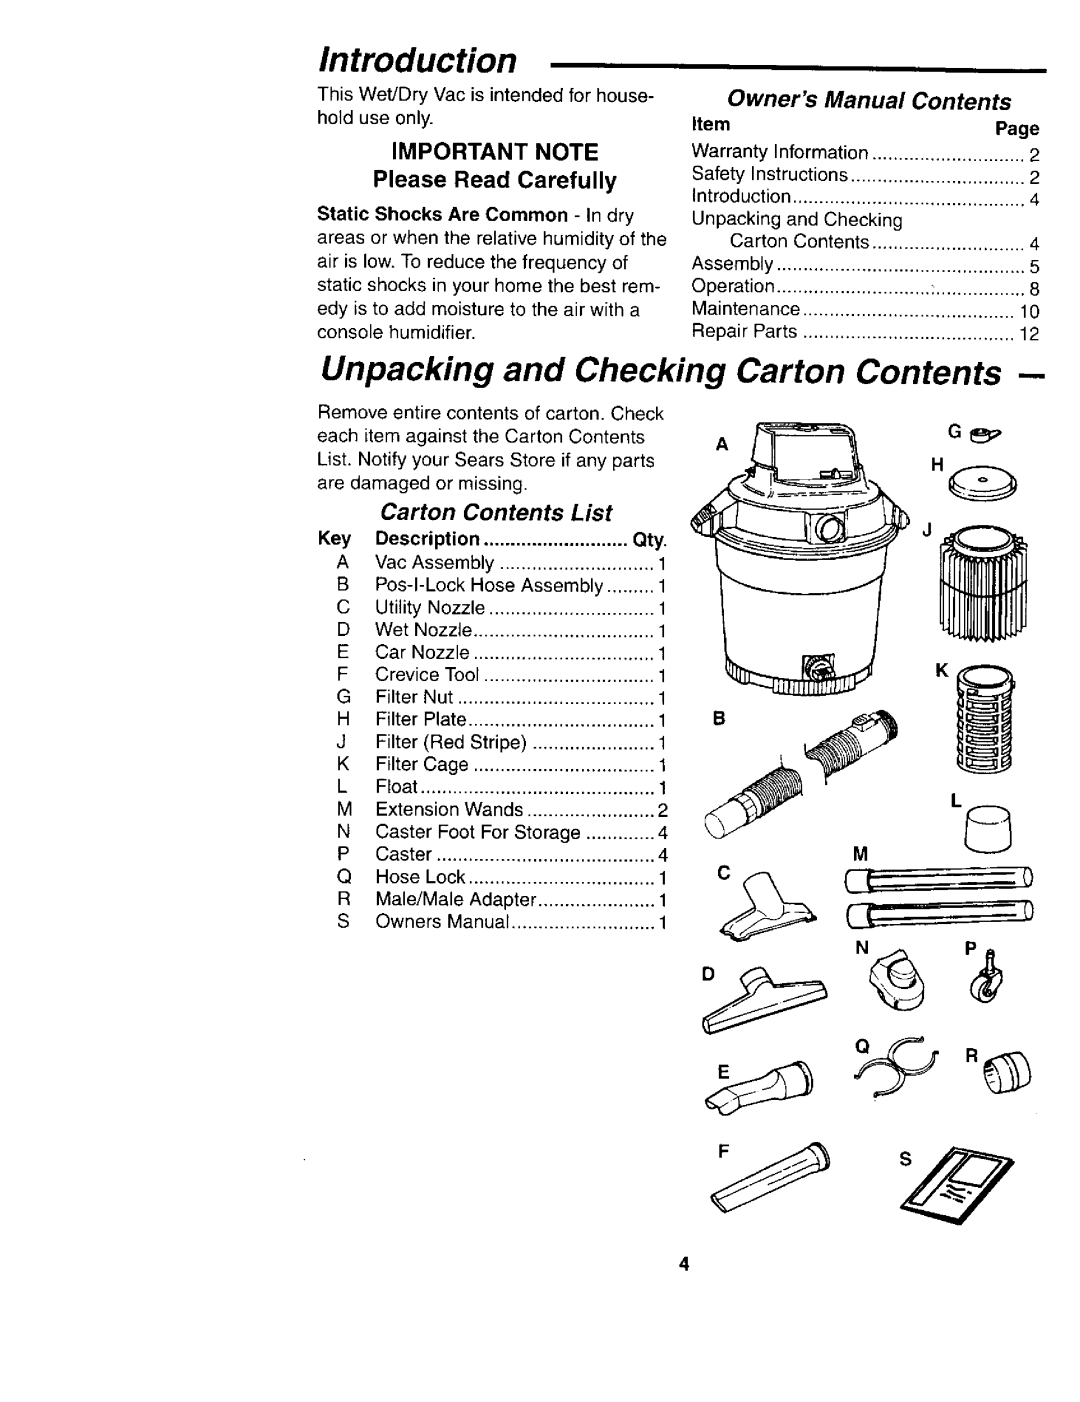 Sears 113.177035 owner manual Introduction, Unpacking Checking Carton Contents 